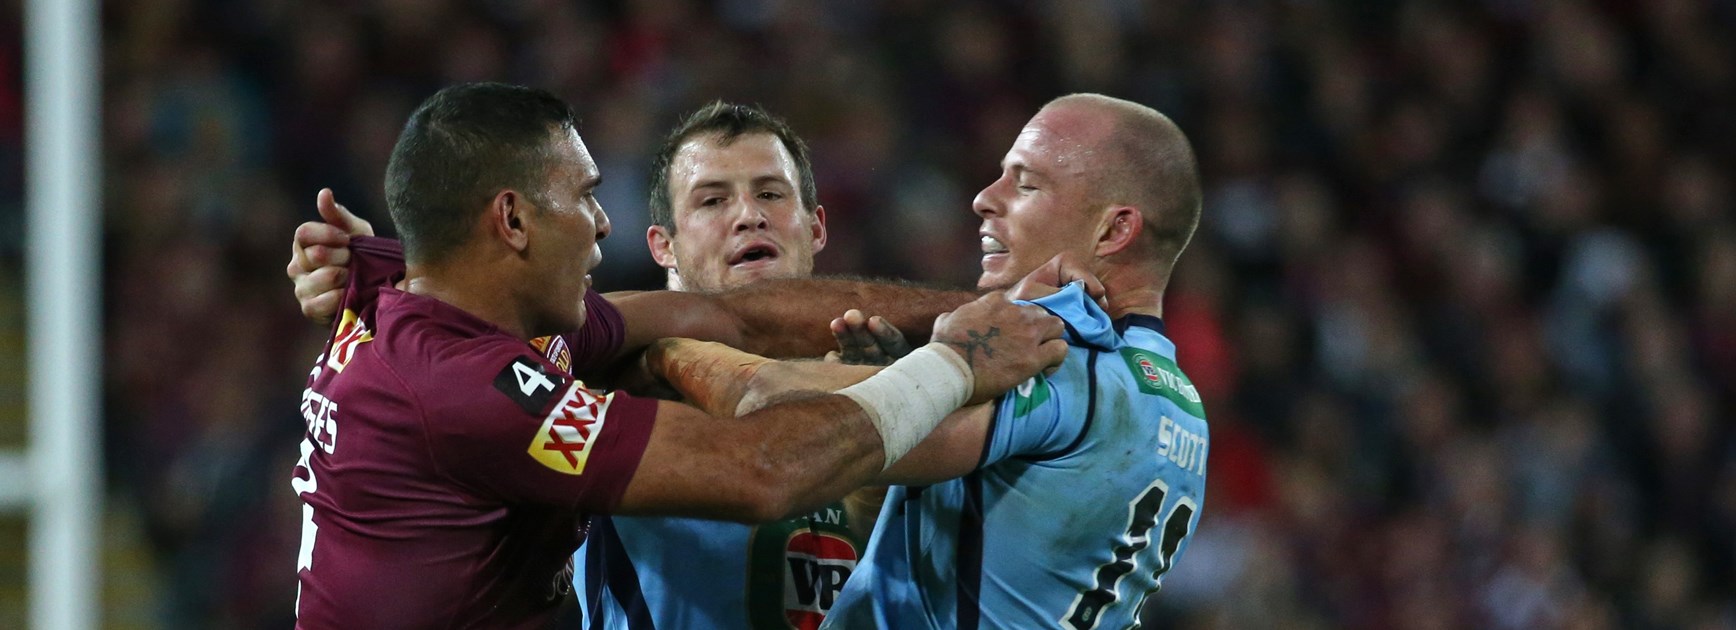 Justin Hodges and Beau Scott square off in 2015.